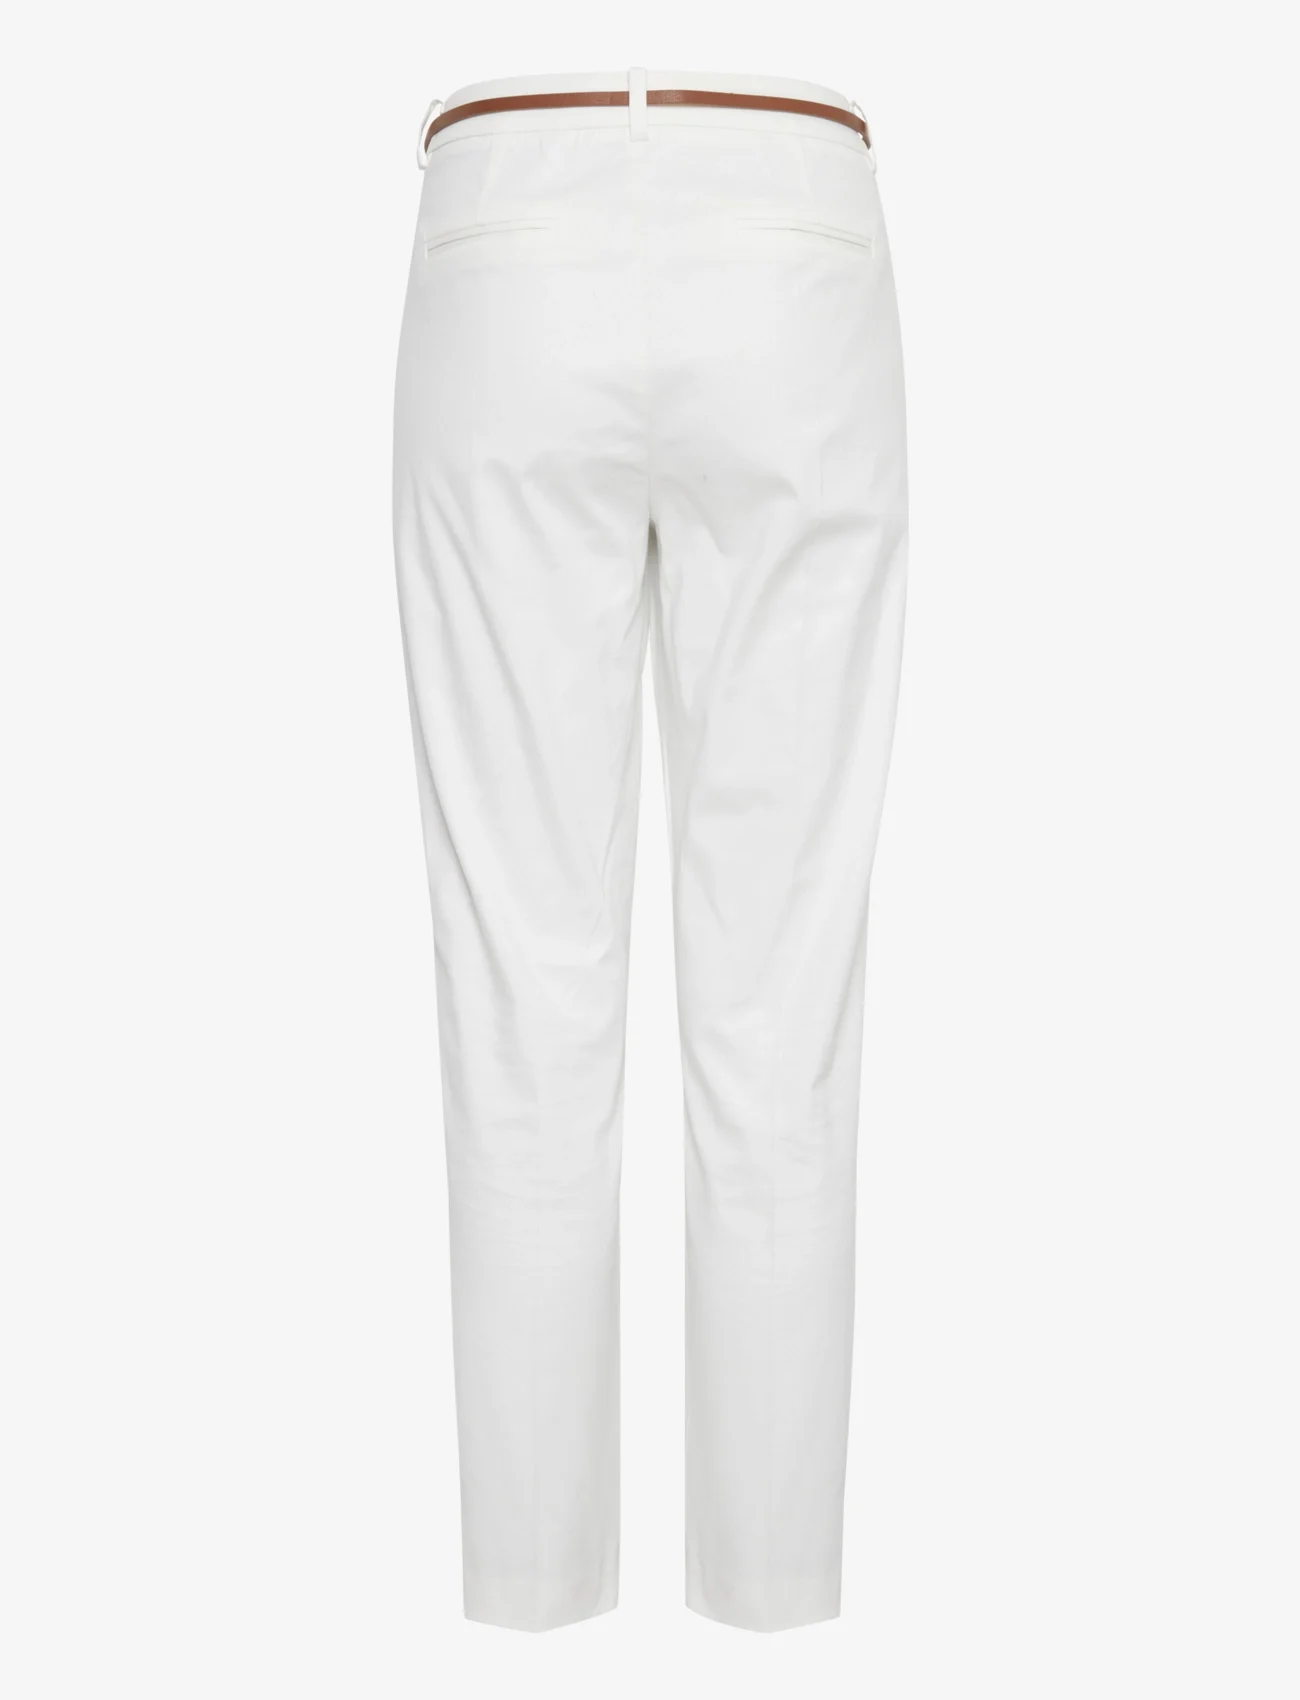 b.young - BYDAYS CIGARET PANTS 2 - - juhlamuotia outlet-hintaan - off white - 1